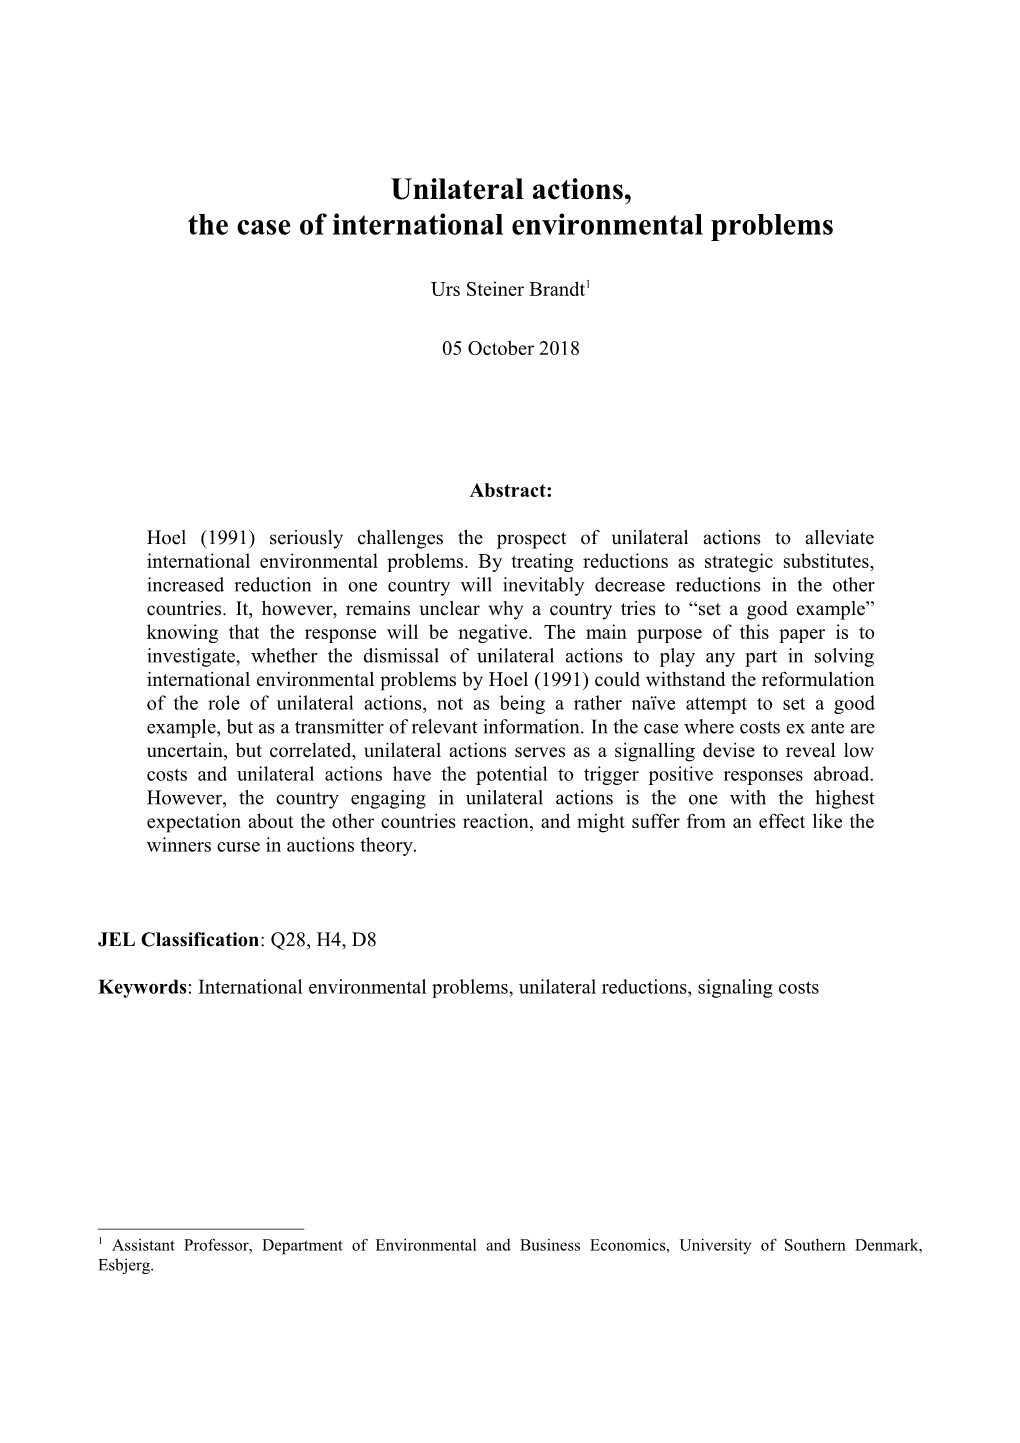 The Case of International Environmental Problems